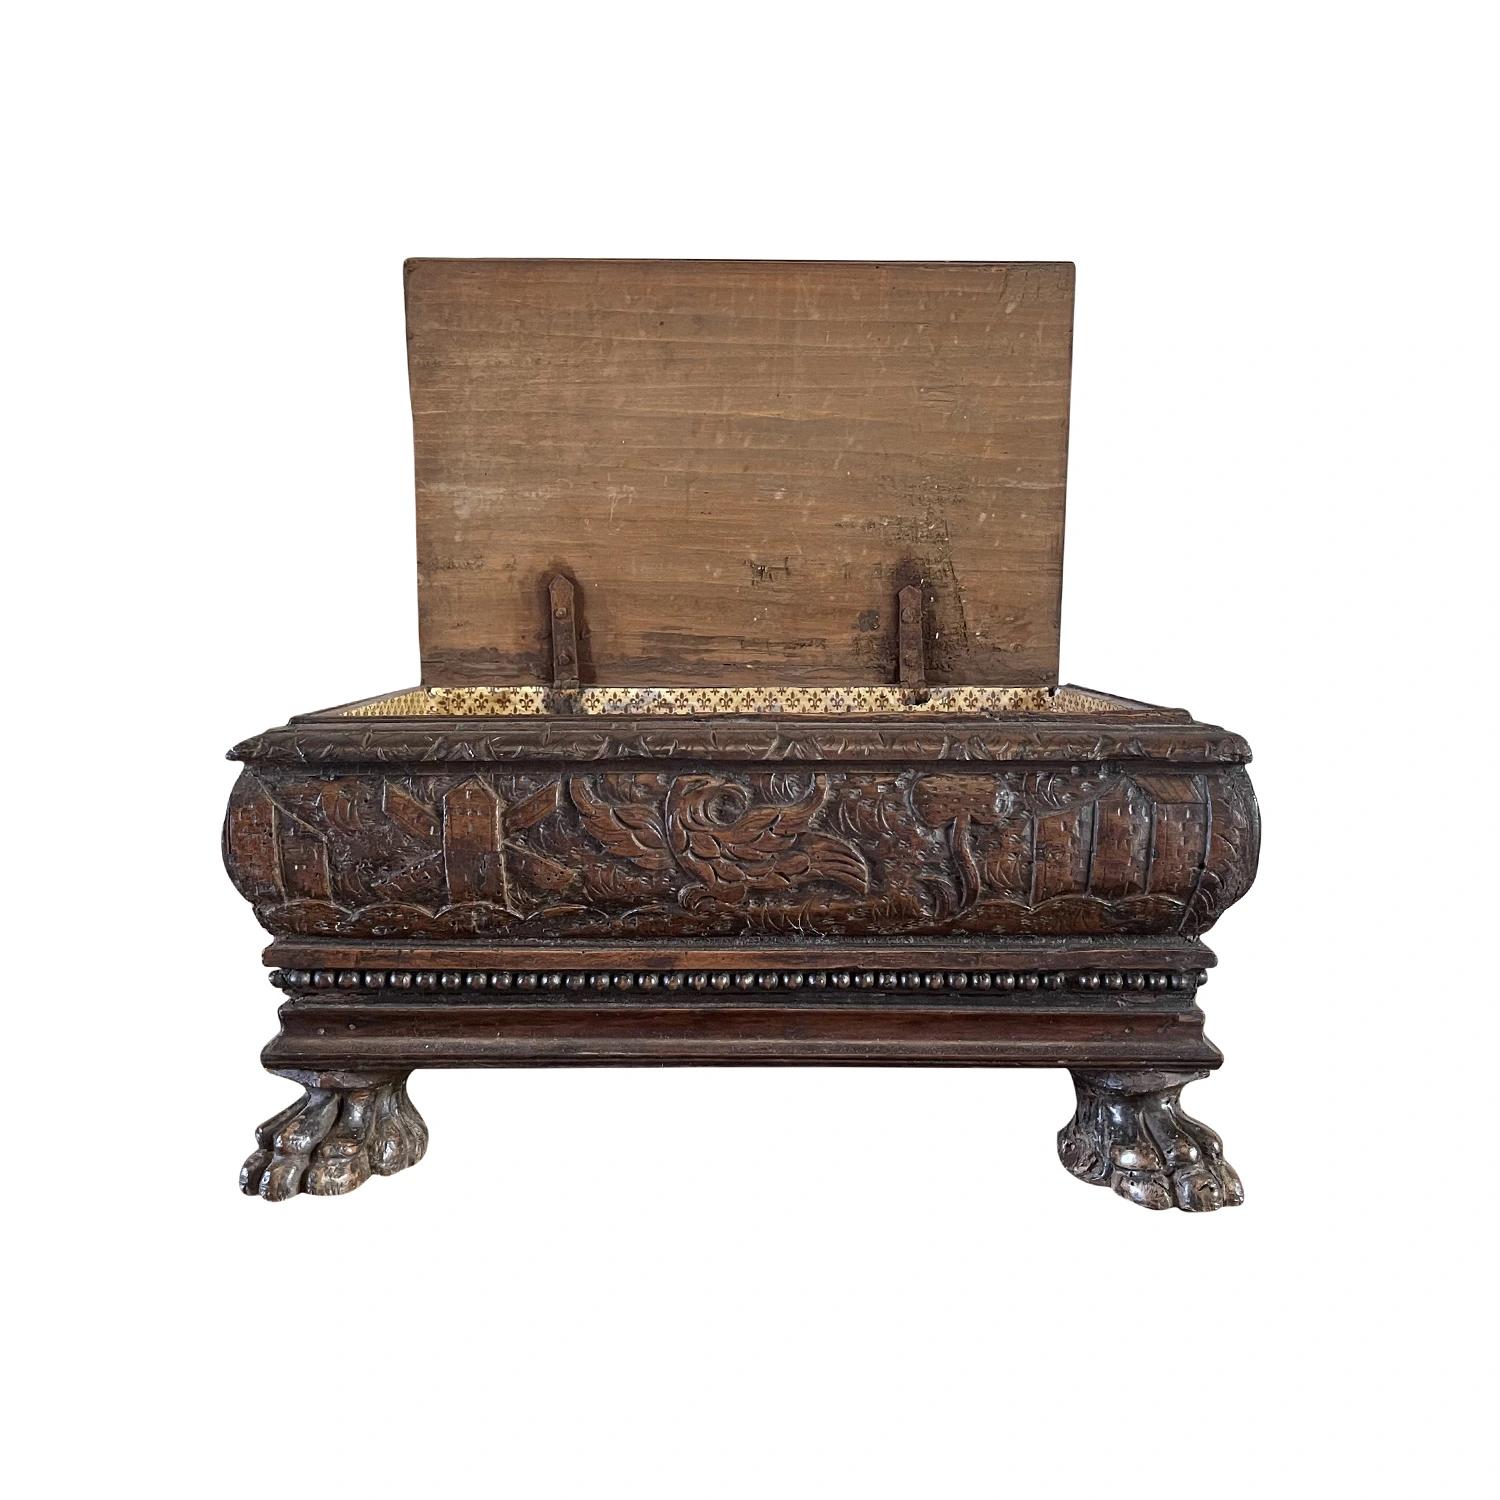 An early Italian coffret from the Renaissance period exquisitely carved in the manner of Rosso Fiorentino. The beauty of the carving is especially remarkable given that the box is made of solid walnut, in good condition. Wear consistent with age and